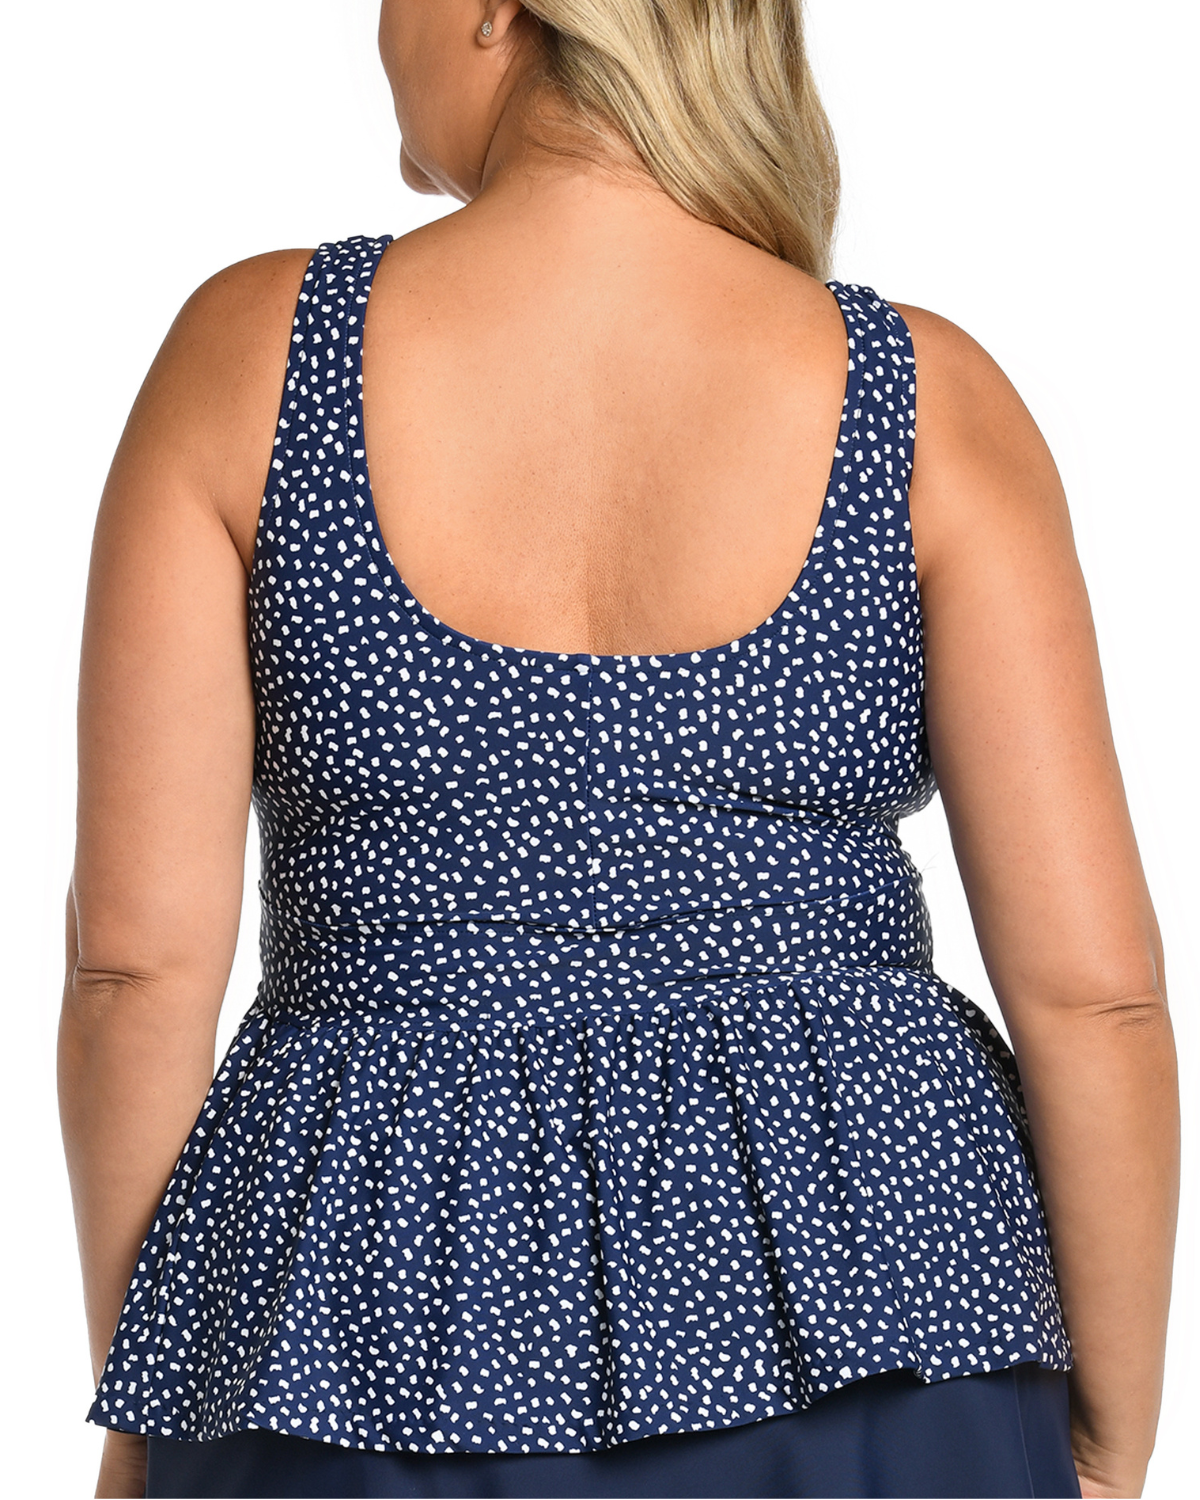 Plus size model wearing a tankini top with a v-neck in a navy and white dot print